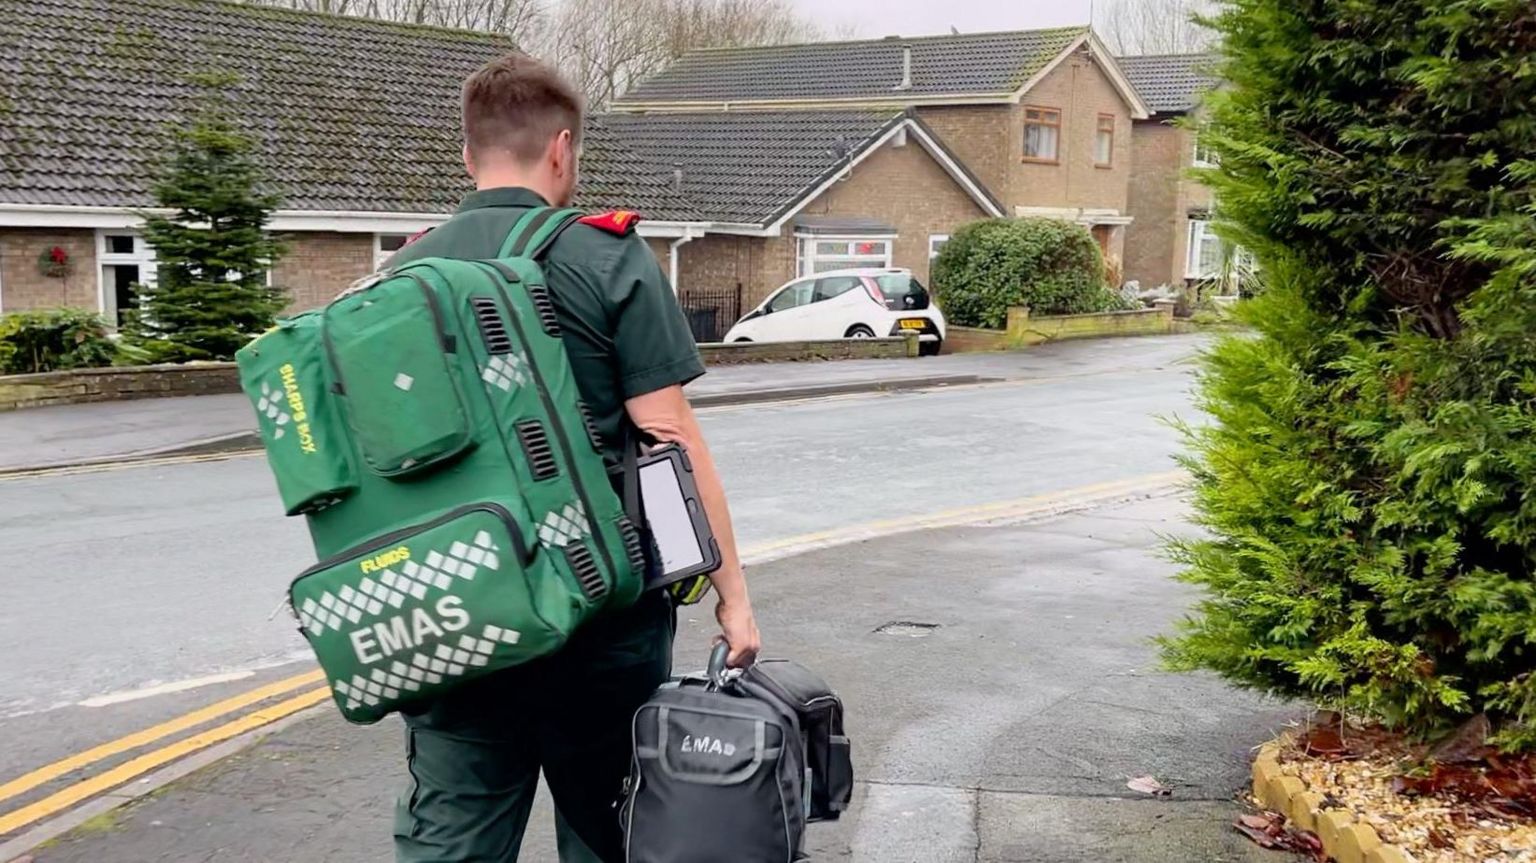 Paramedic carries equipment in street